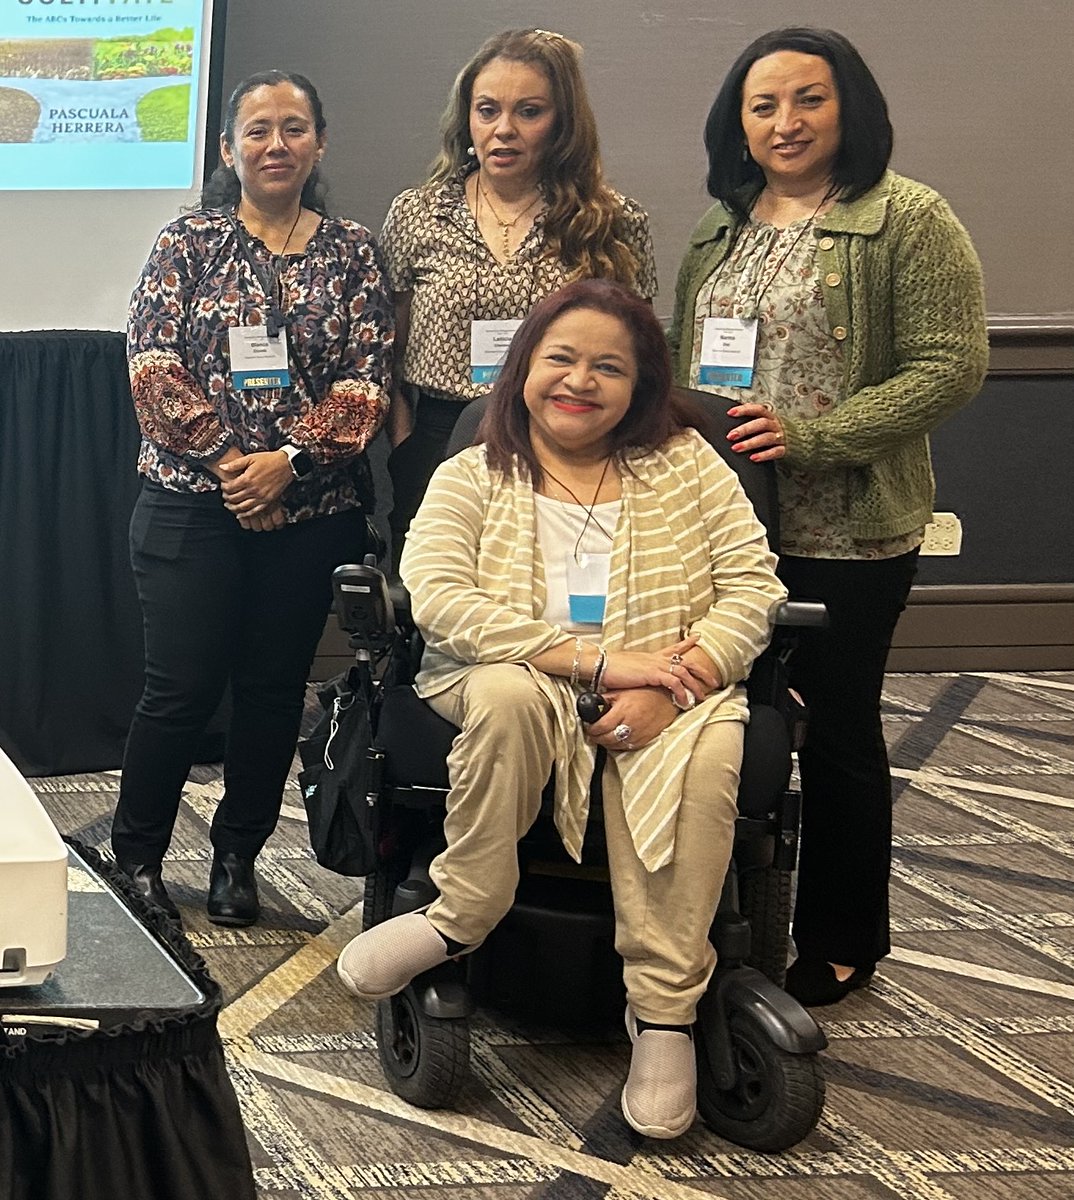 #d83shines Our wonderful BPAC members Norma Diaz, Leti Chaidez, Blanca Elizalde share their experiences Bilingual Parent State Summit. Author @PascualaHerrera led the presentation in sharing  effective book studies with BPAC members.    @ISBEnews @IL_Resource_Ctr BPAC SHINES!